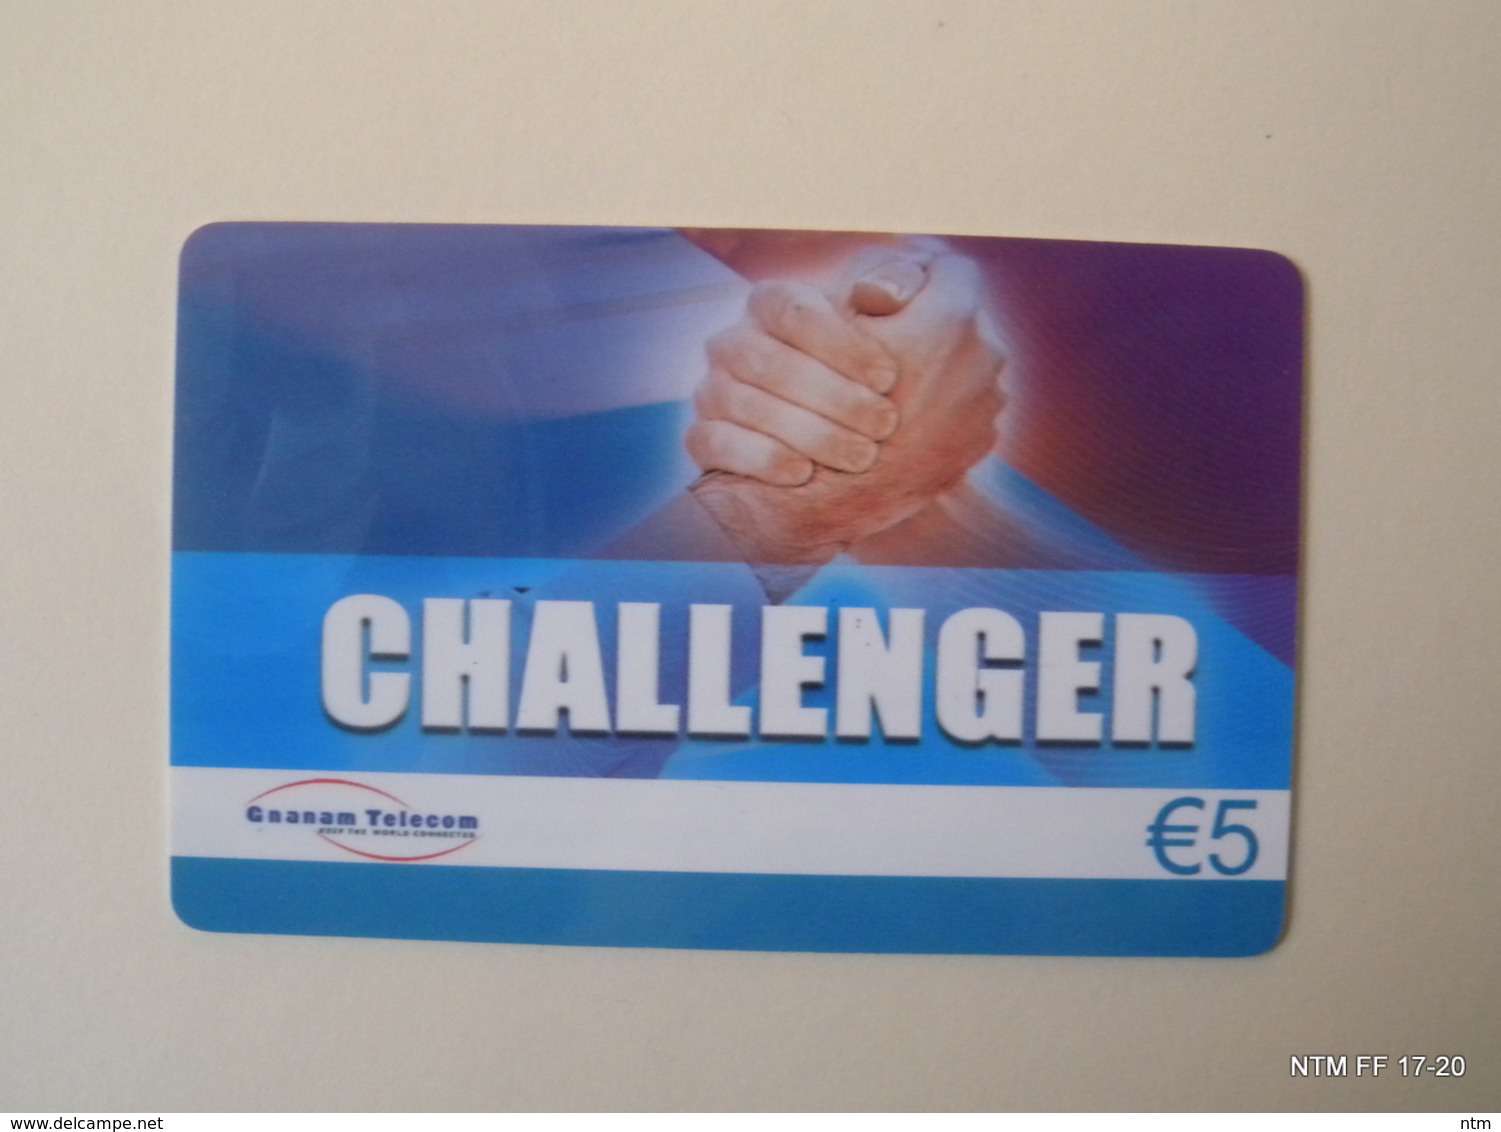 BELGIUM Yesr 2010 - Challenger - Gnanam Telecom  - Fast Card - Pre Paid Card (€5) Used. - [2] Prepaid & Refill Cards